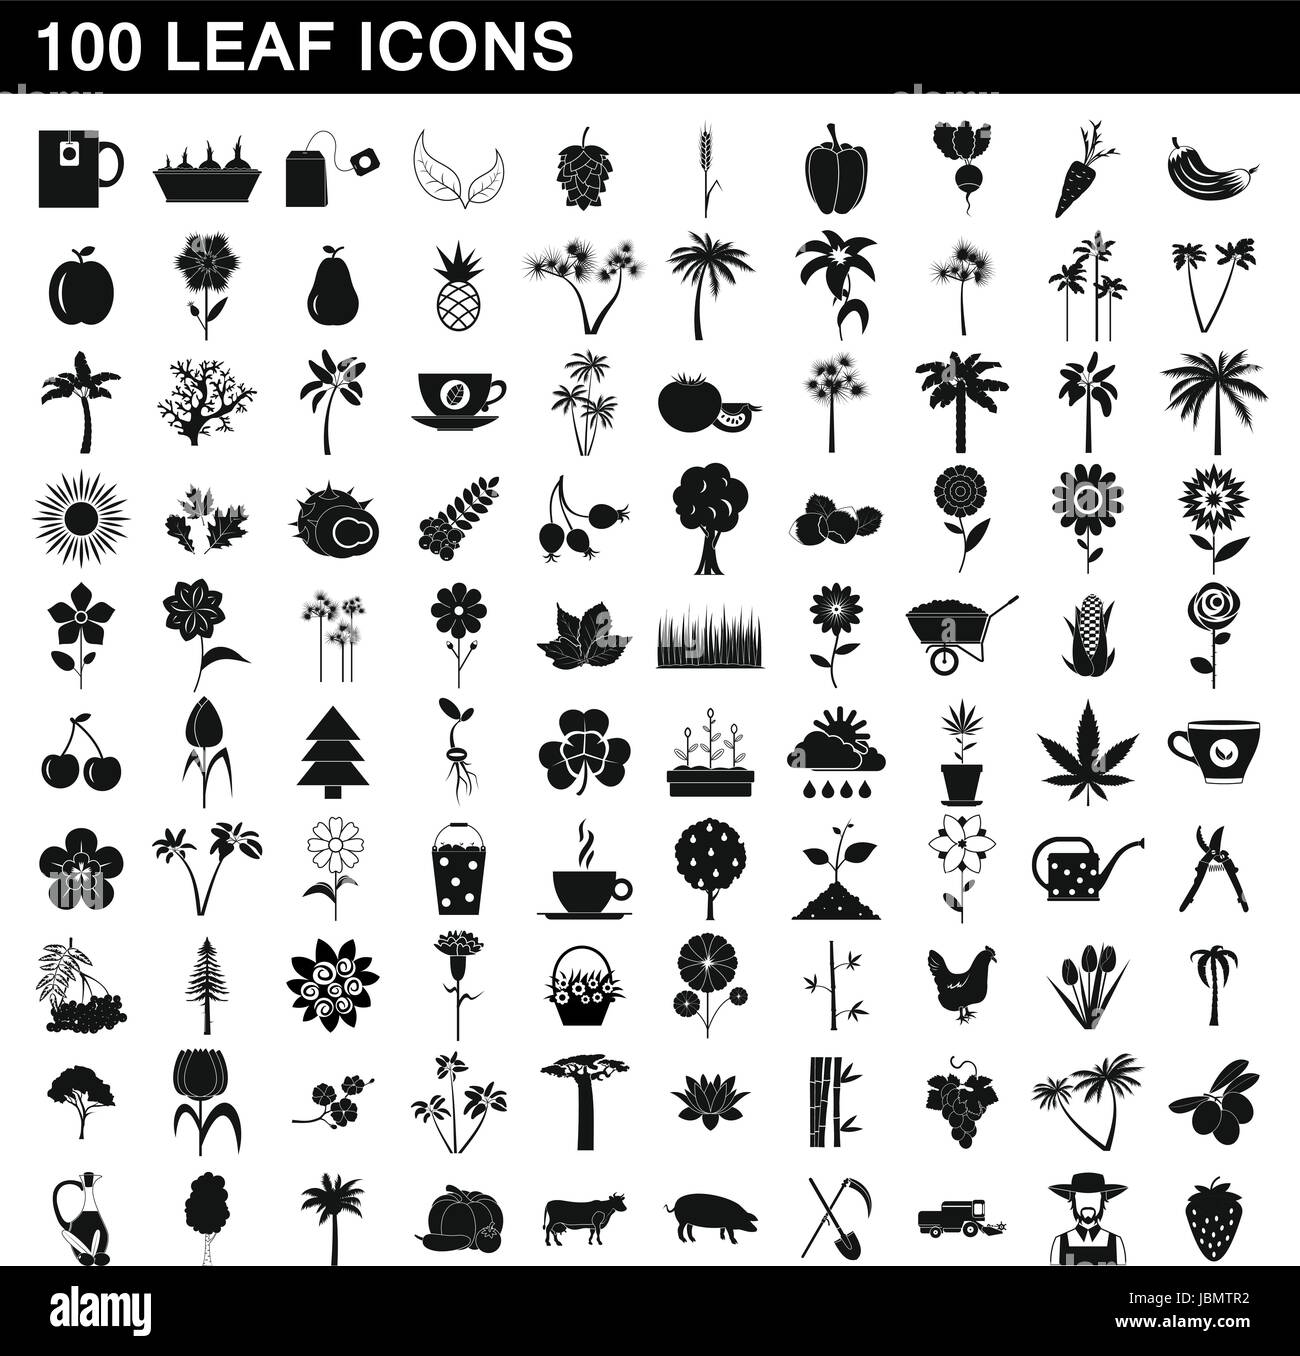 100 leaf icons set, simple style Stock Vector